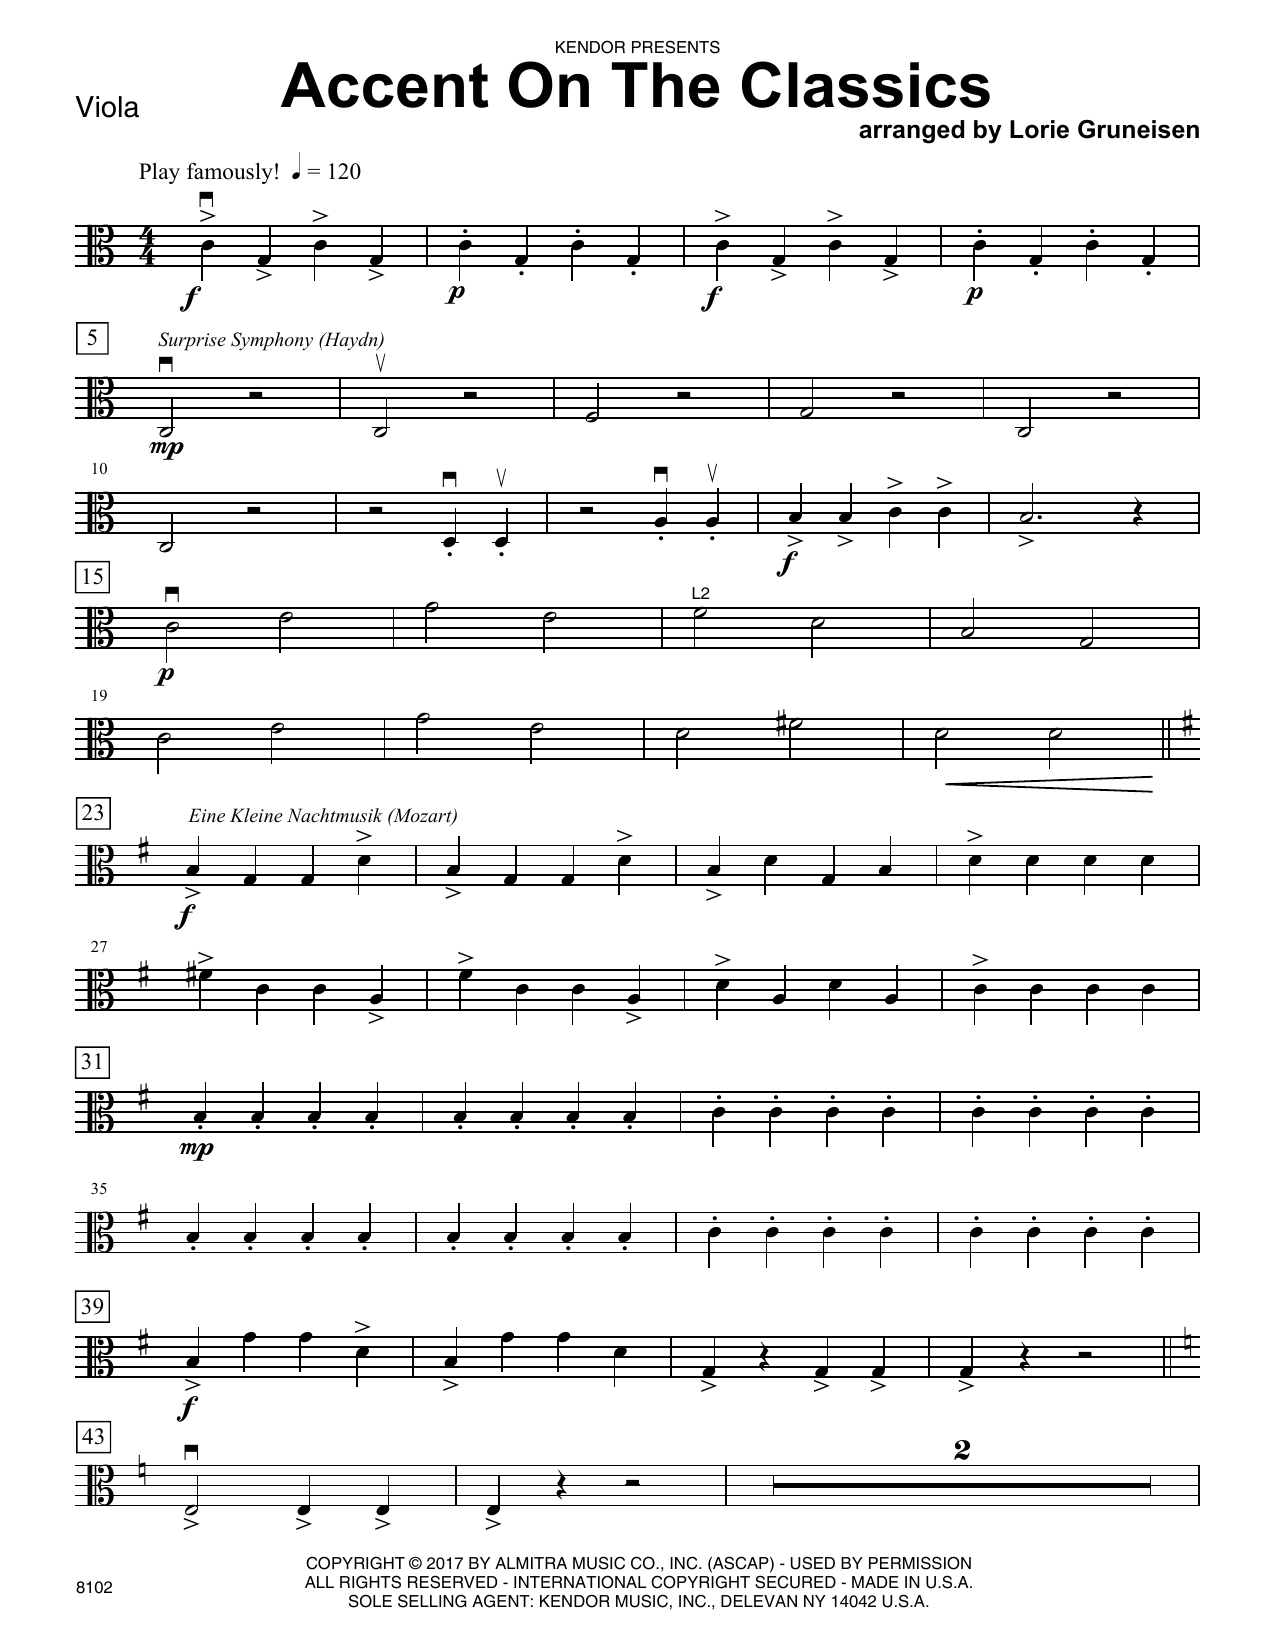 Download Lorie Gruneisen Accent On The Classics - Viola Sheet Music